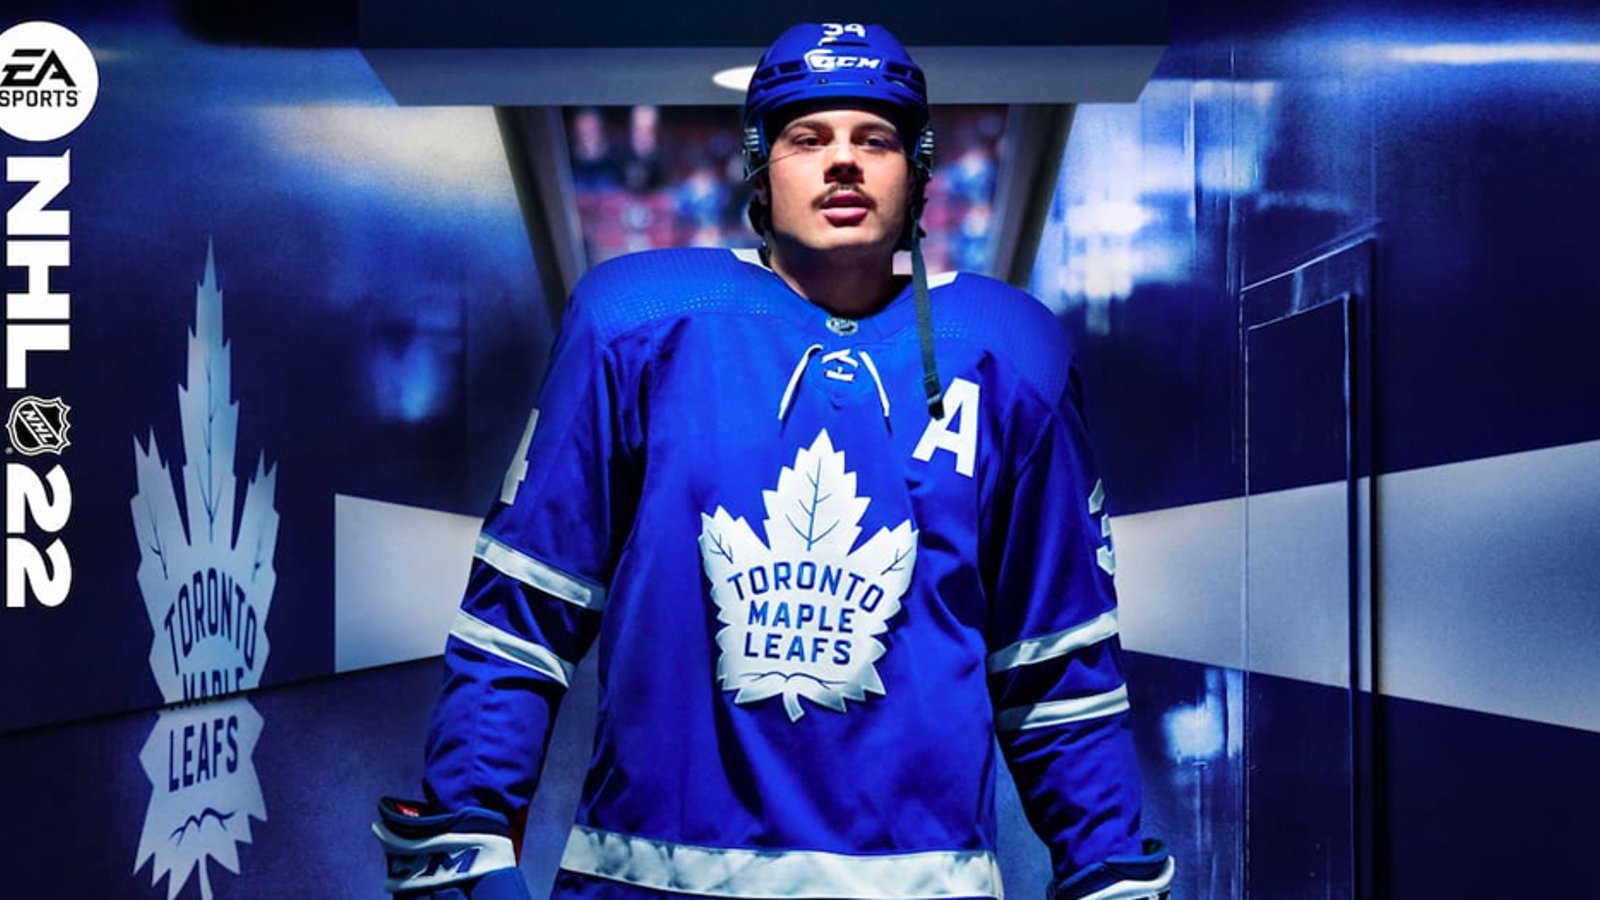 Auston Matthews Of The Toronto Maple Leafs Is NHL 22's Cover Star - Game  Informer